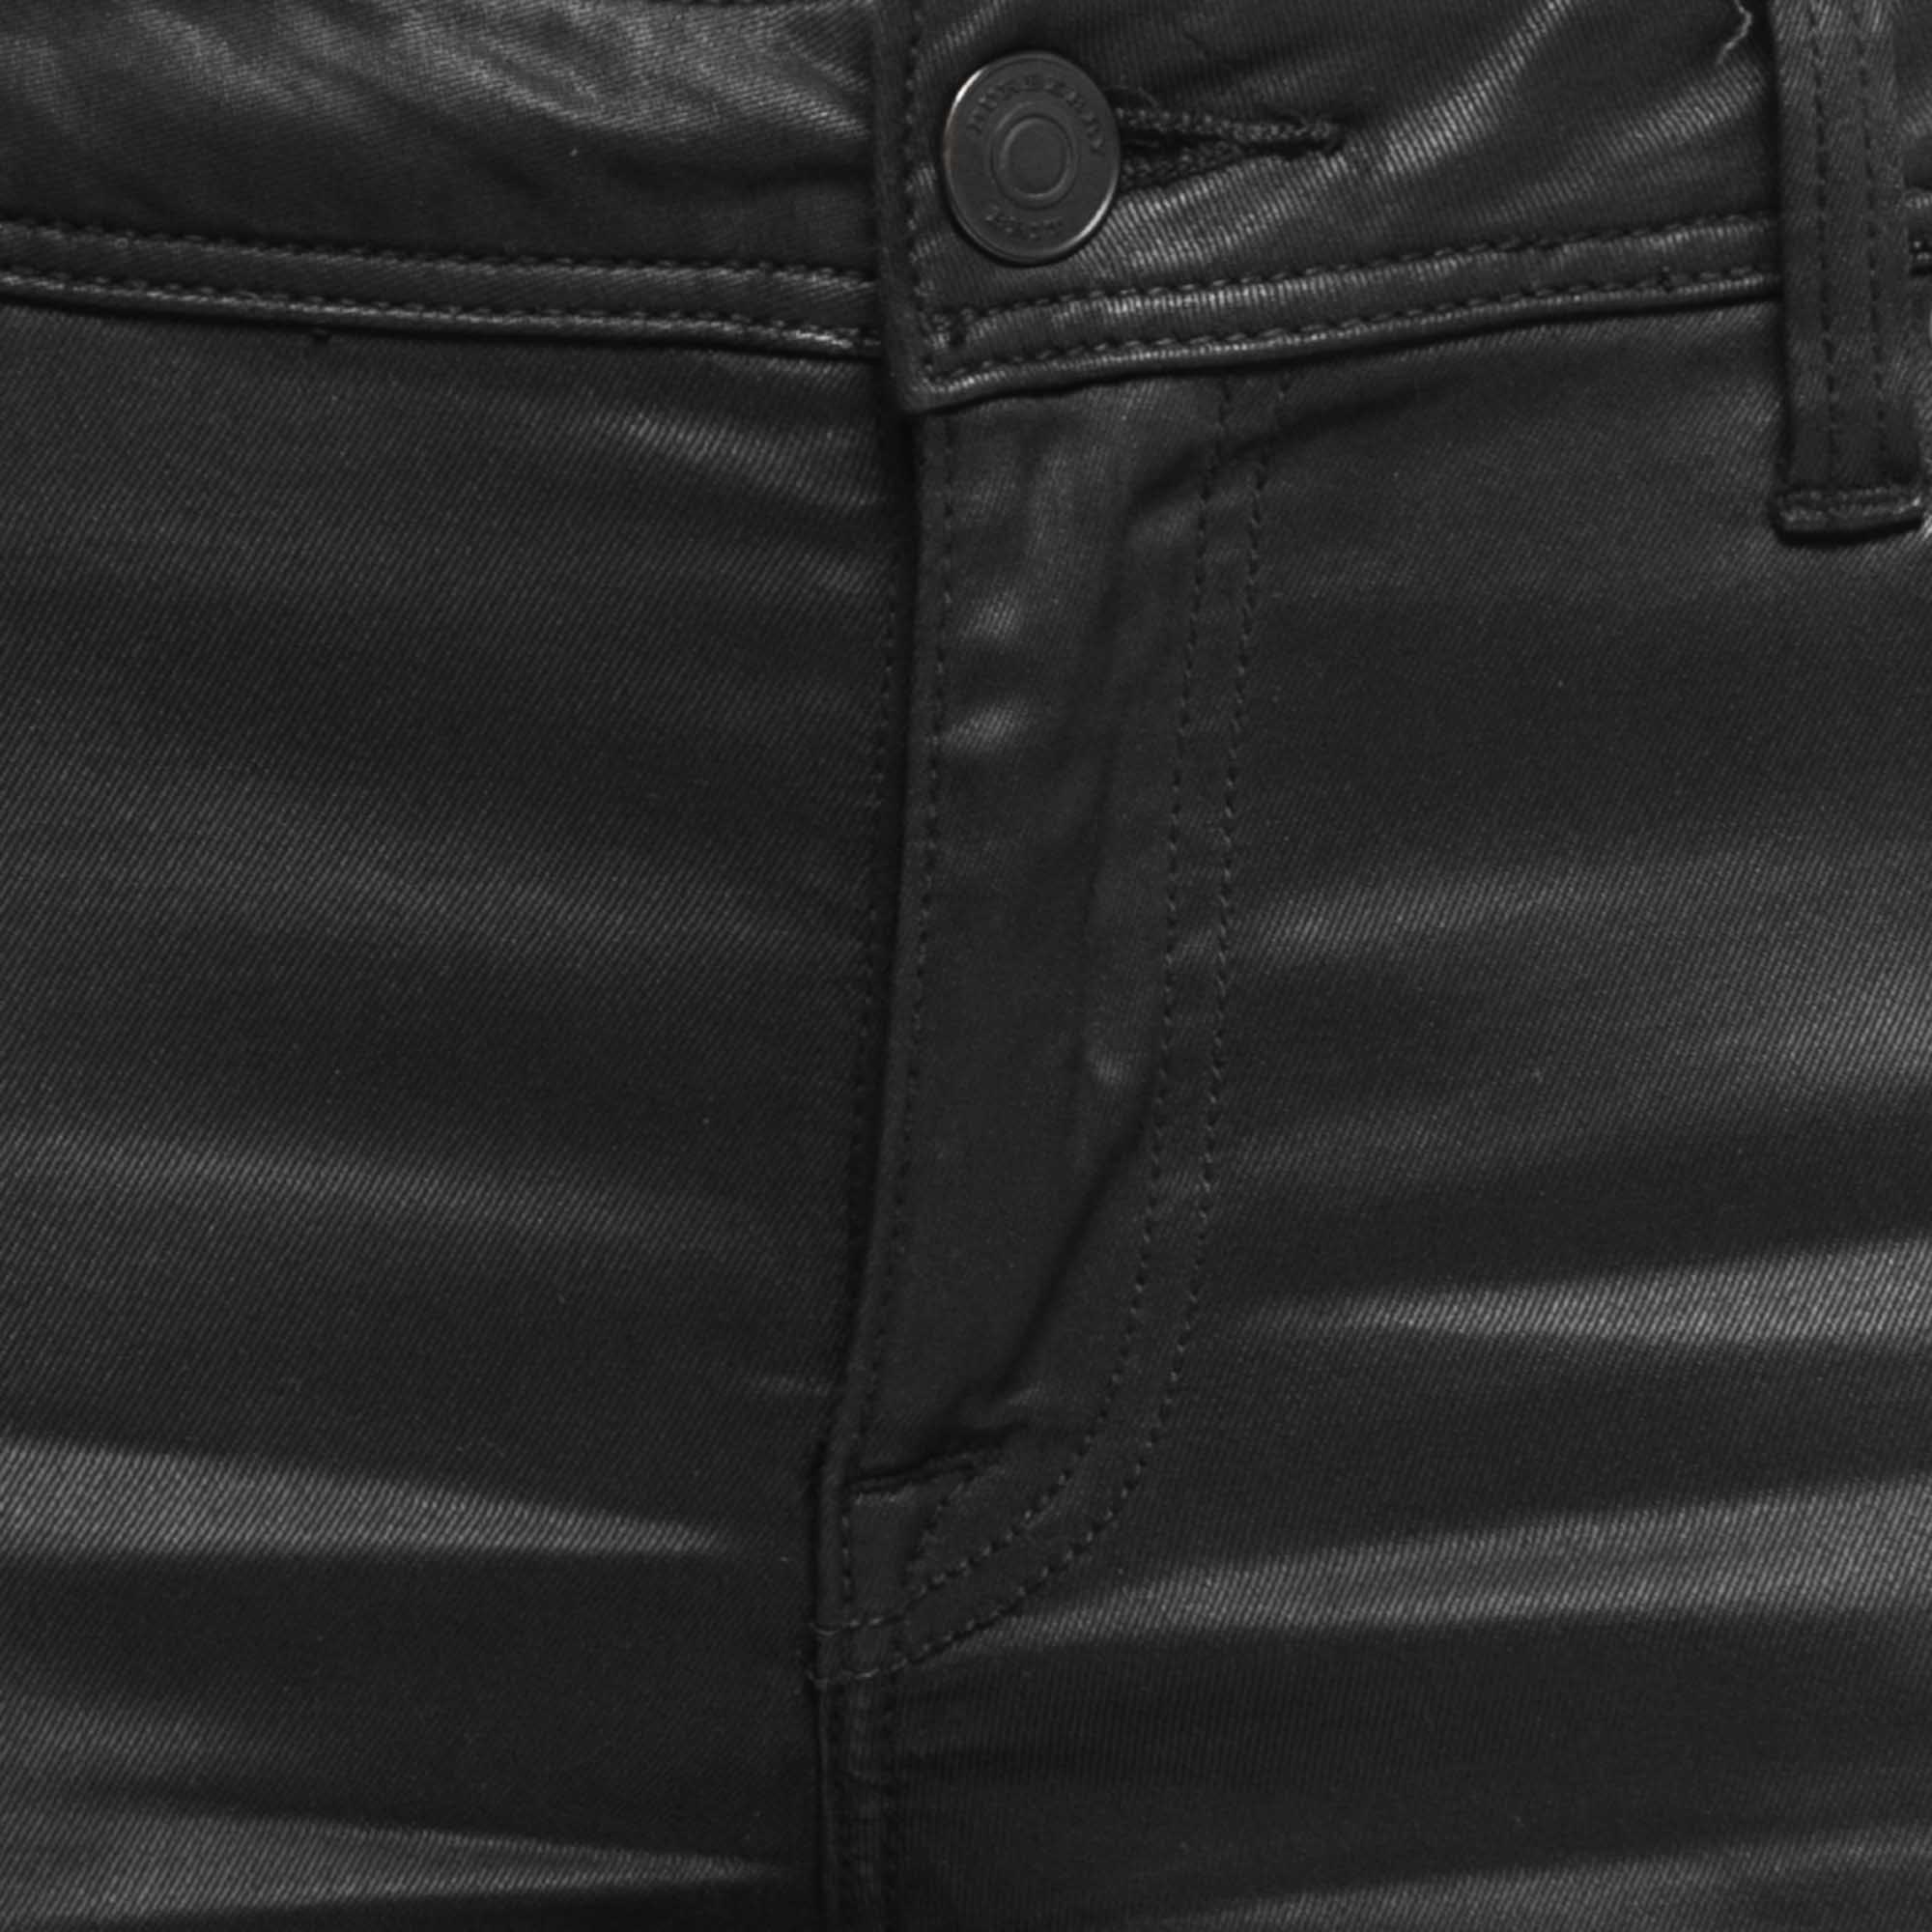 Burberry Brit Black Coated Cotton Low Rise Skinny Jeans S Waist 26